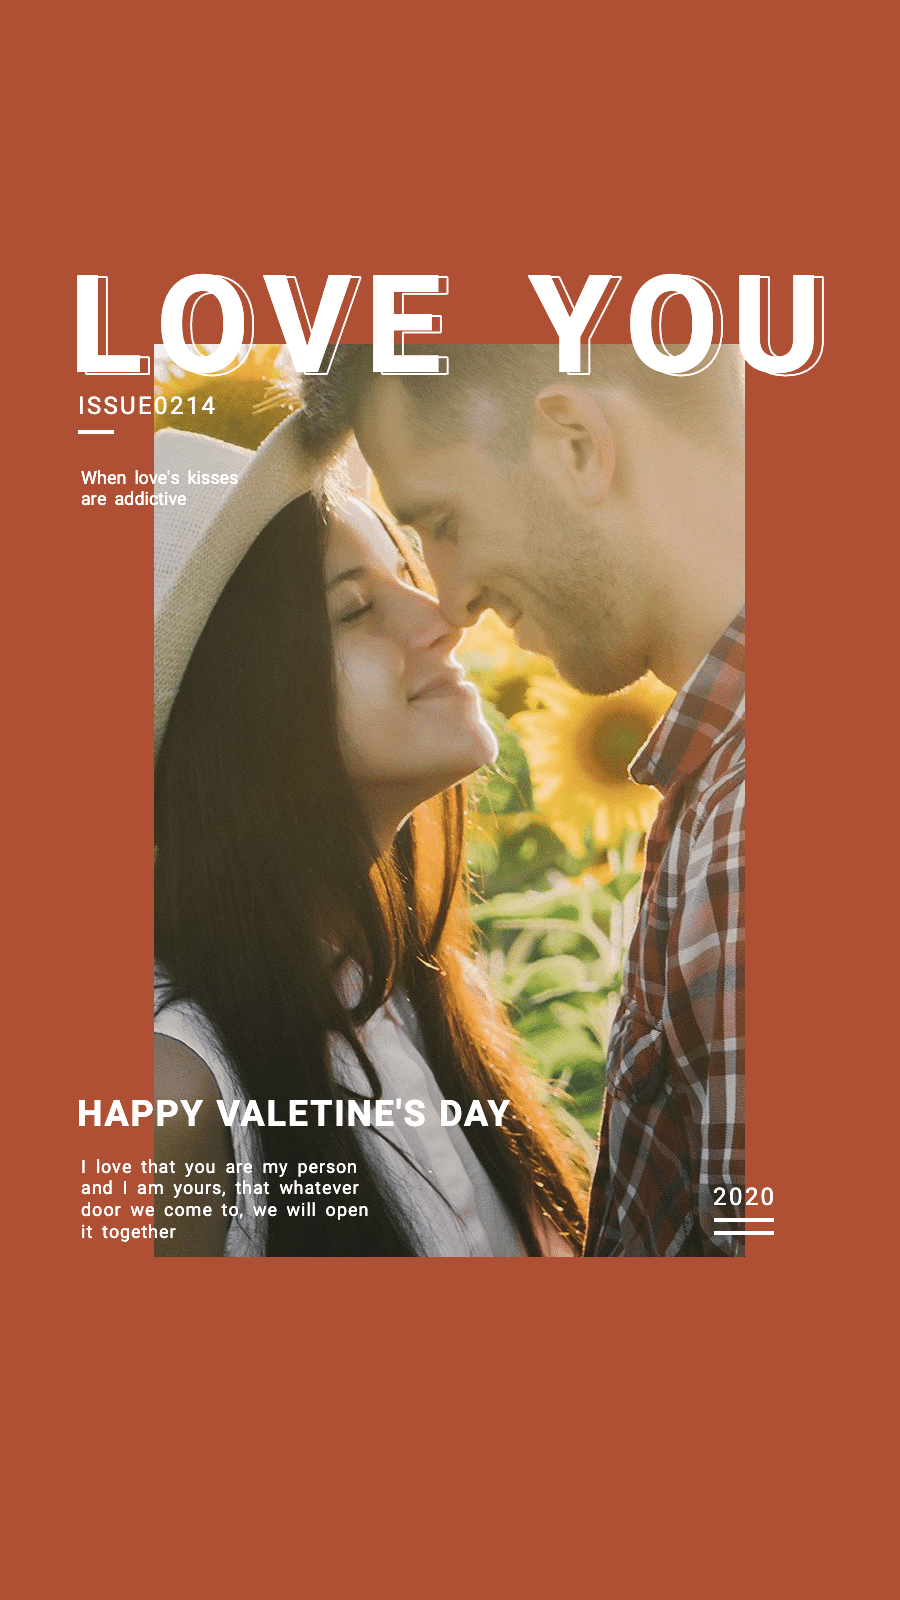 Red Background Valentine's Day Couple Photo Valentine's Day Festival Promotion Simple Fashion Style Instagram Story